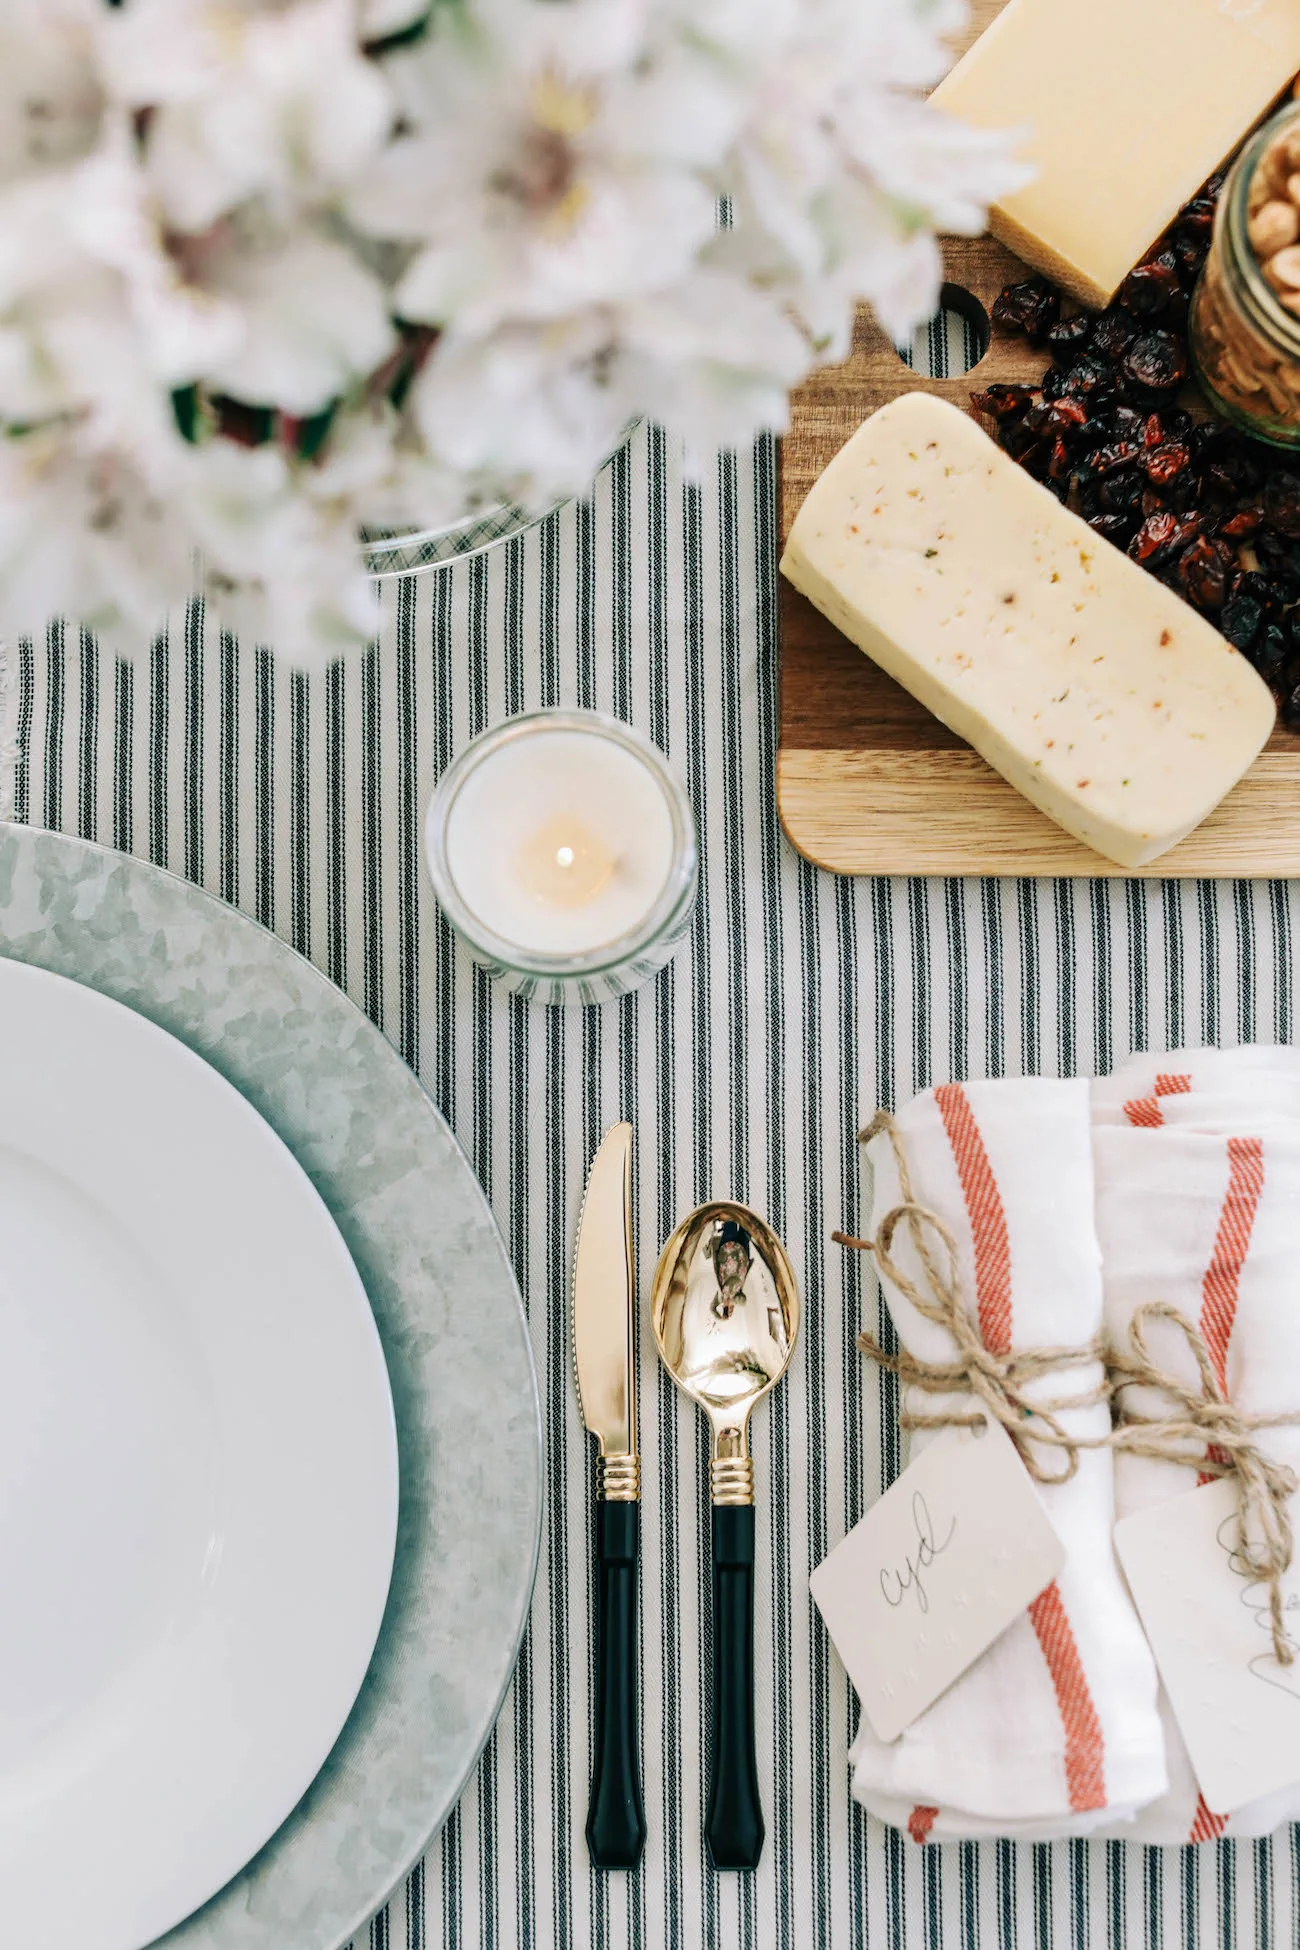 Setting the Table for a Casual Dinner Party | Dinner party ideas, party recipes, cocktail recipes and dinner party ideas from entertaining blog @cydconverse